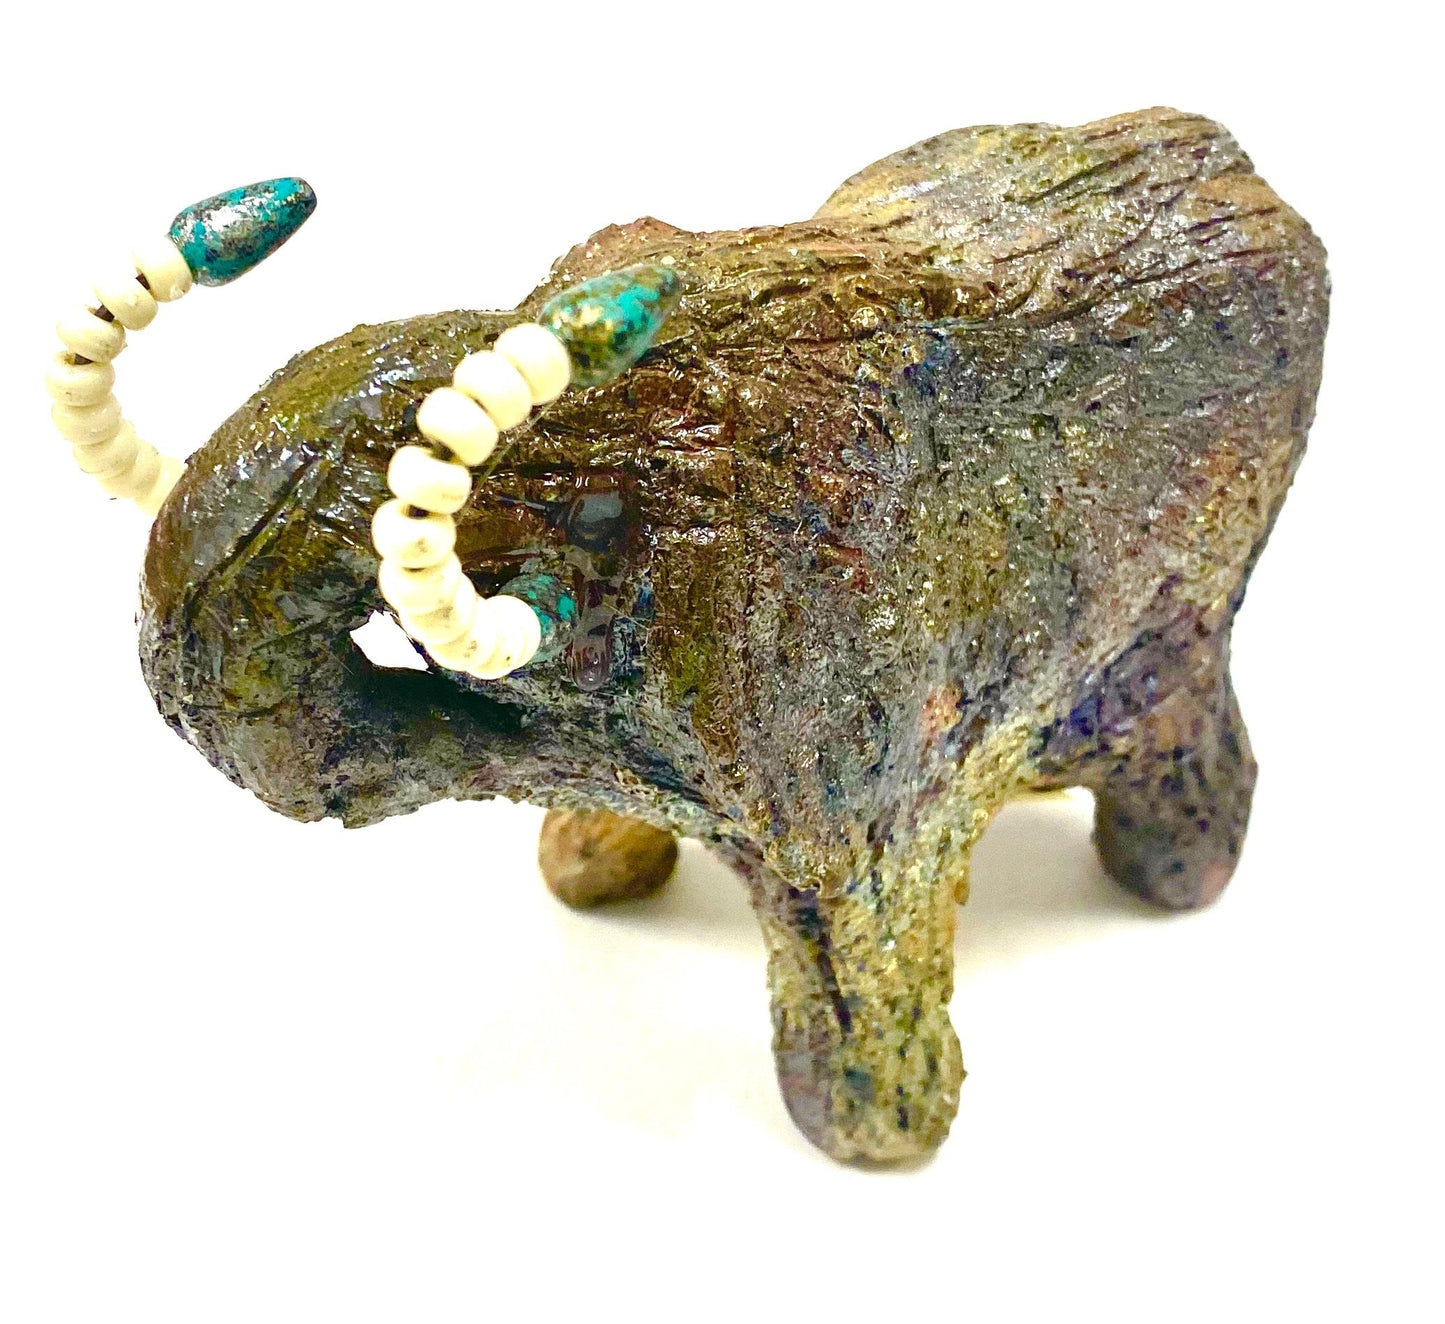 Have you HERD!!!!!!     Elephants are one of my favorite animals to create. They are so majestic"  Just one of these lovely Raku Fired Elephant will make an excellent gift for your  BFF,  or just for you .    This raku fired elephant sits 4.5" x 3" x 4" and weighs 1 lbs. She has beaded tusks and a textured copper charcoal body. This one will be nice to add your Herdew Collection!